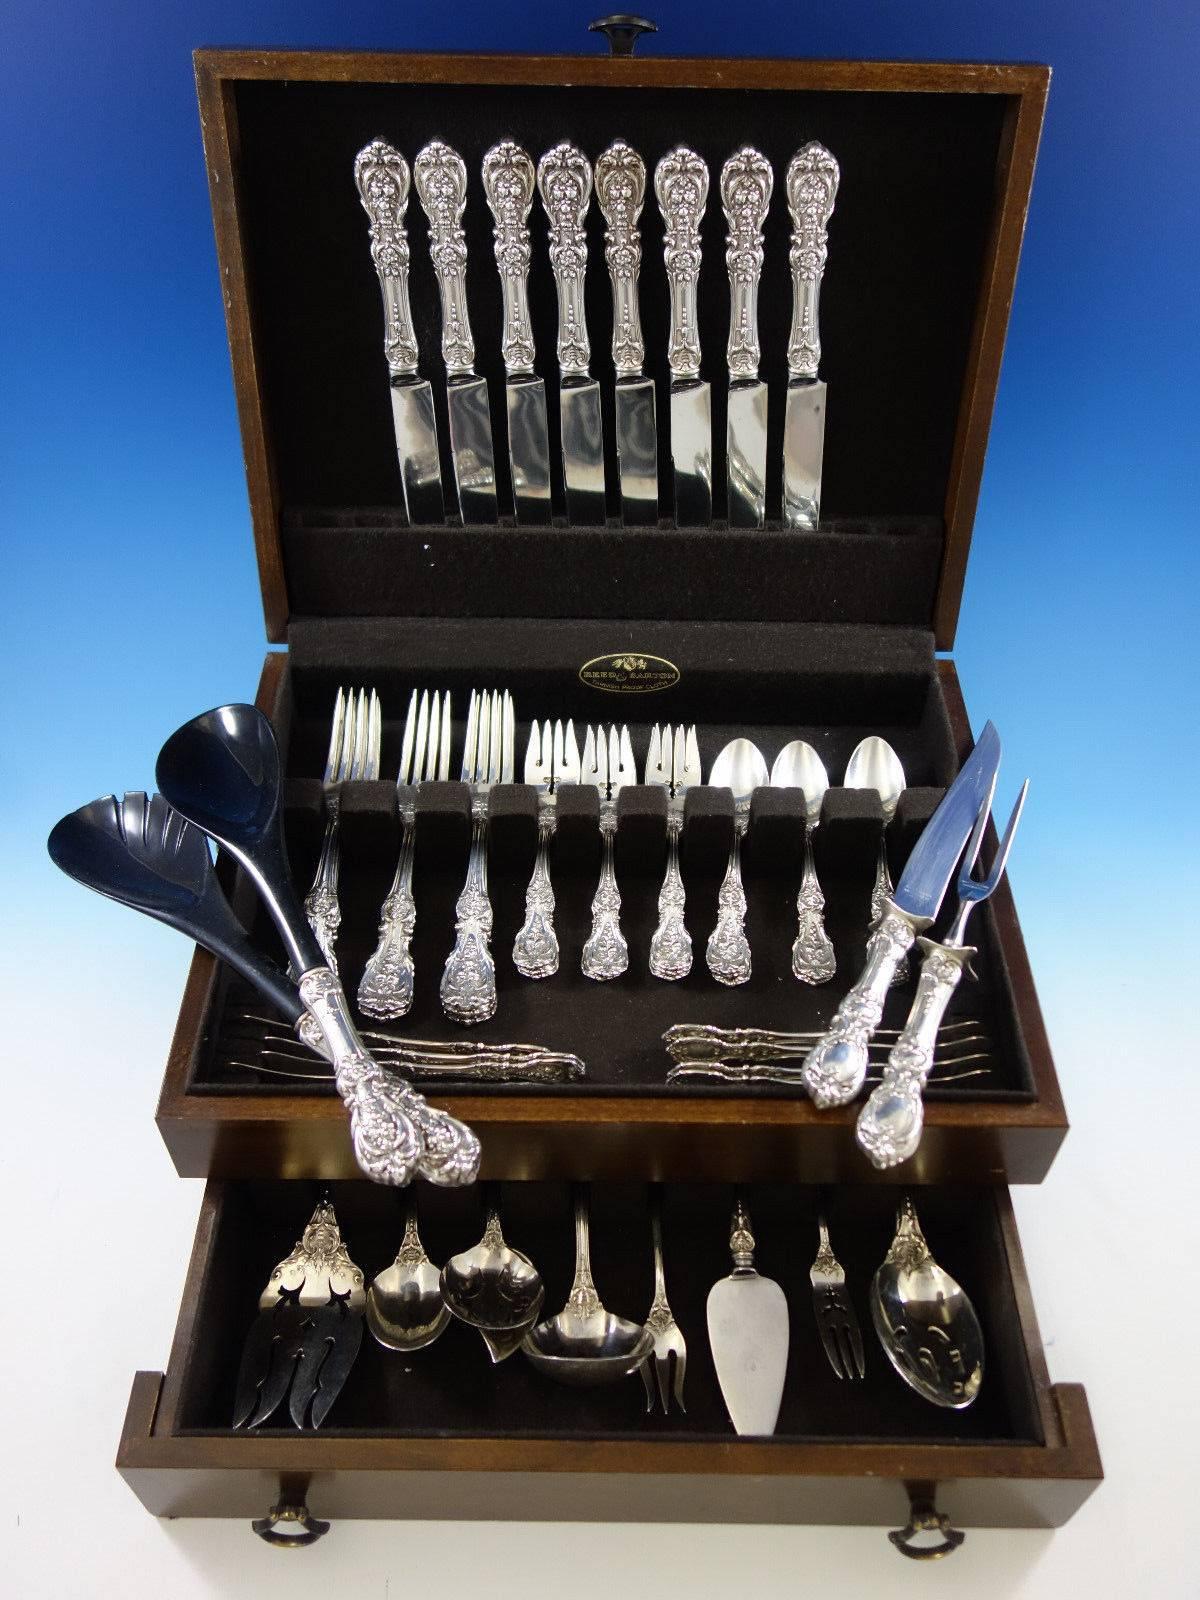 Dinner size Francis I by Reed & Barton old sterling silver flatware set, 54 pieces. This set includes: 

eight dinner size knives, 9 3/4